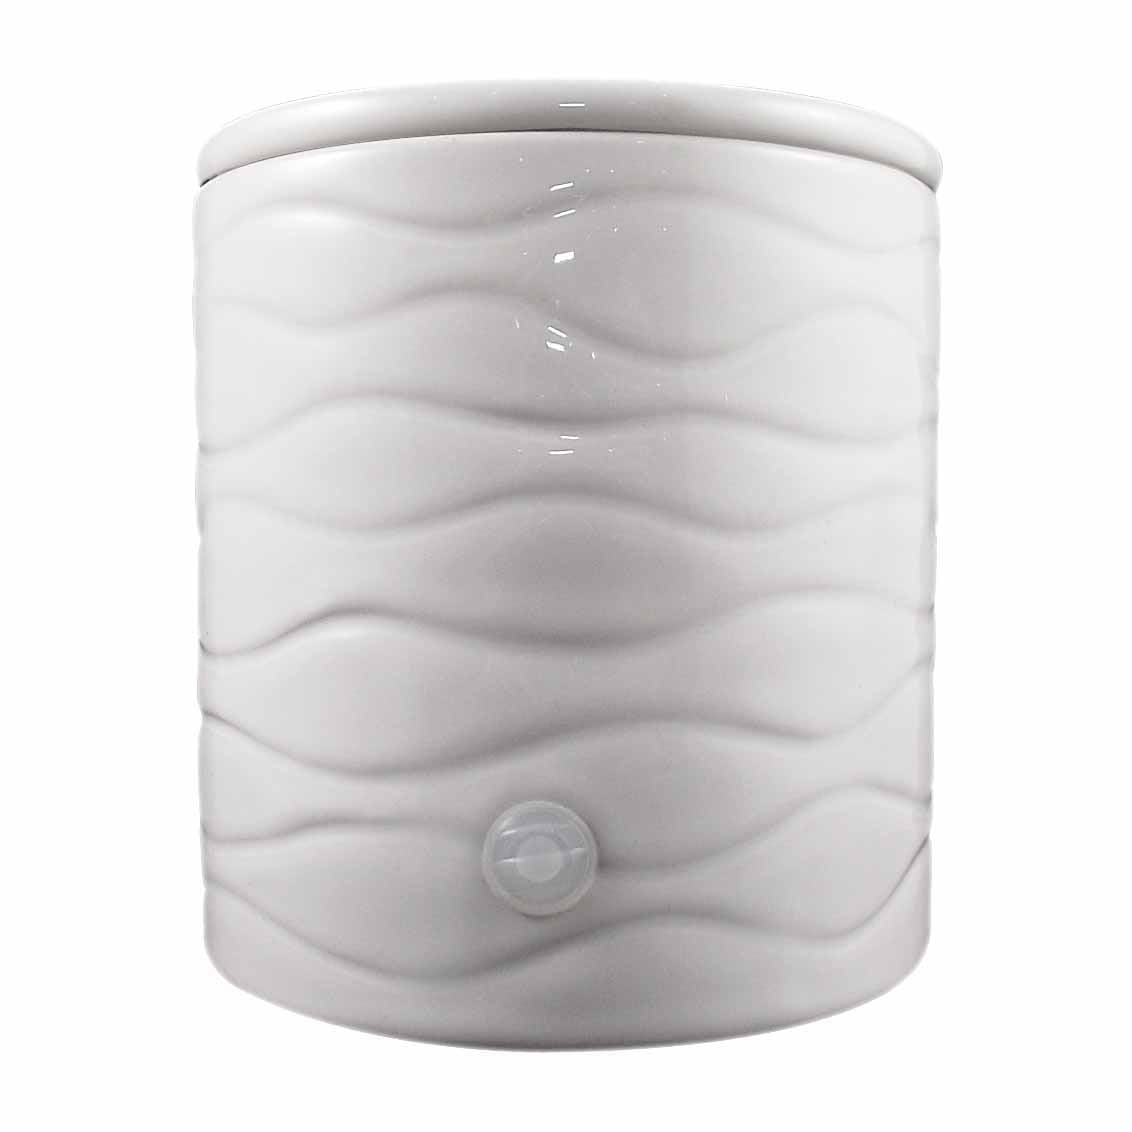 home scents electric wax warmer